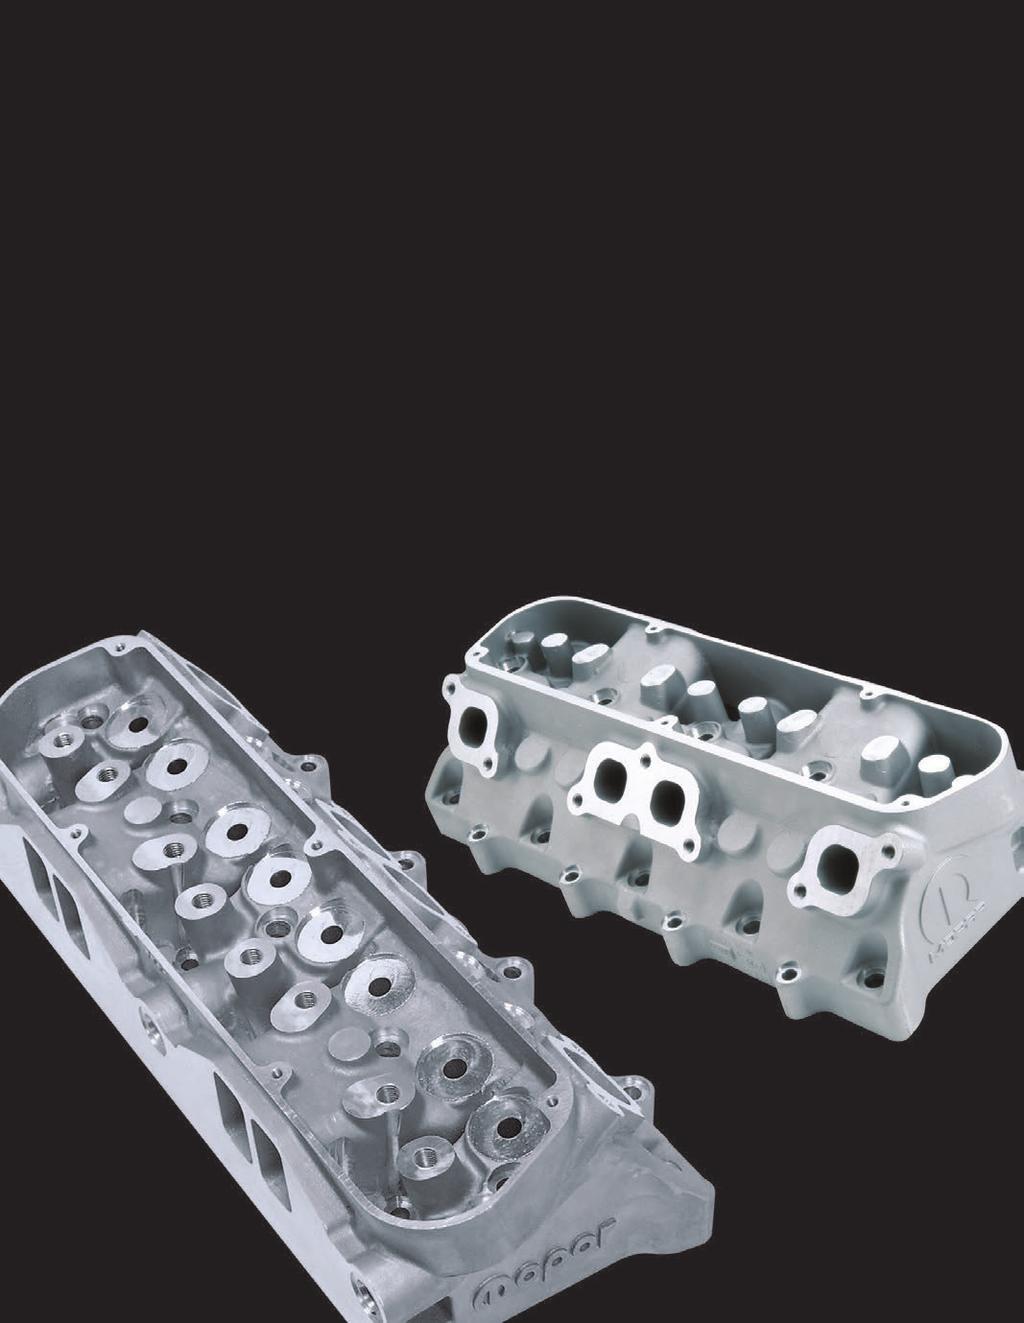 CYLINDER HEADS, GASKETS & HARDWARE Mopar cylinder heads are where it all comes together spark, fuel and air. This is where the power is made.